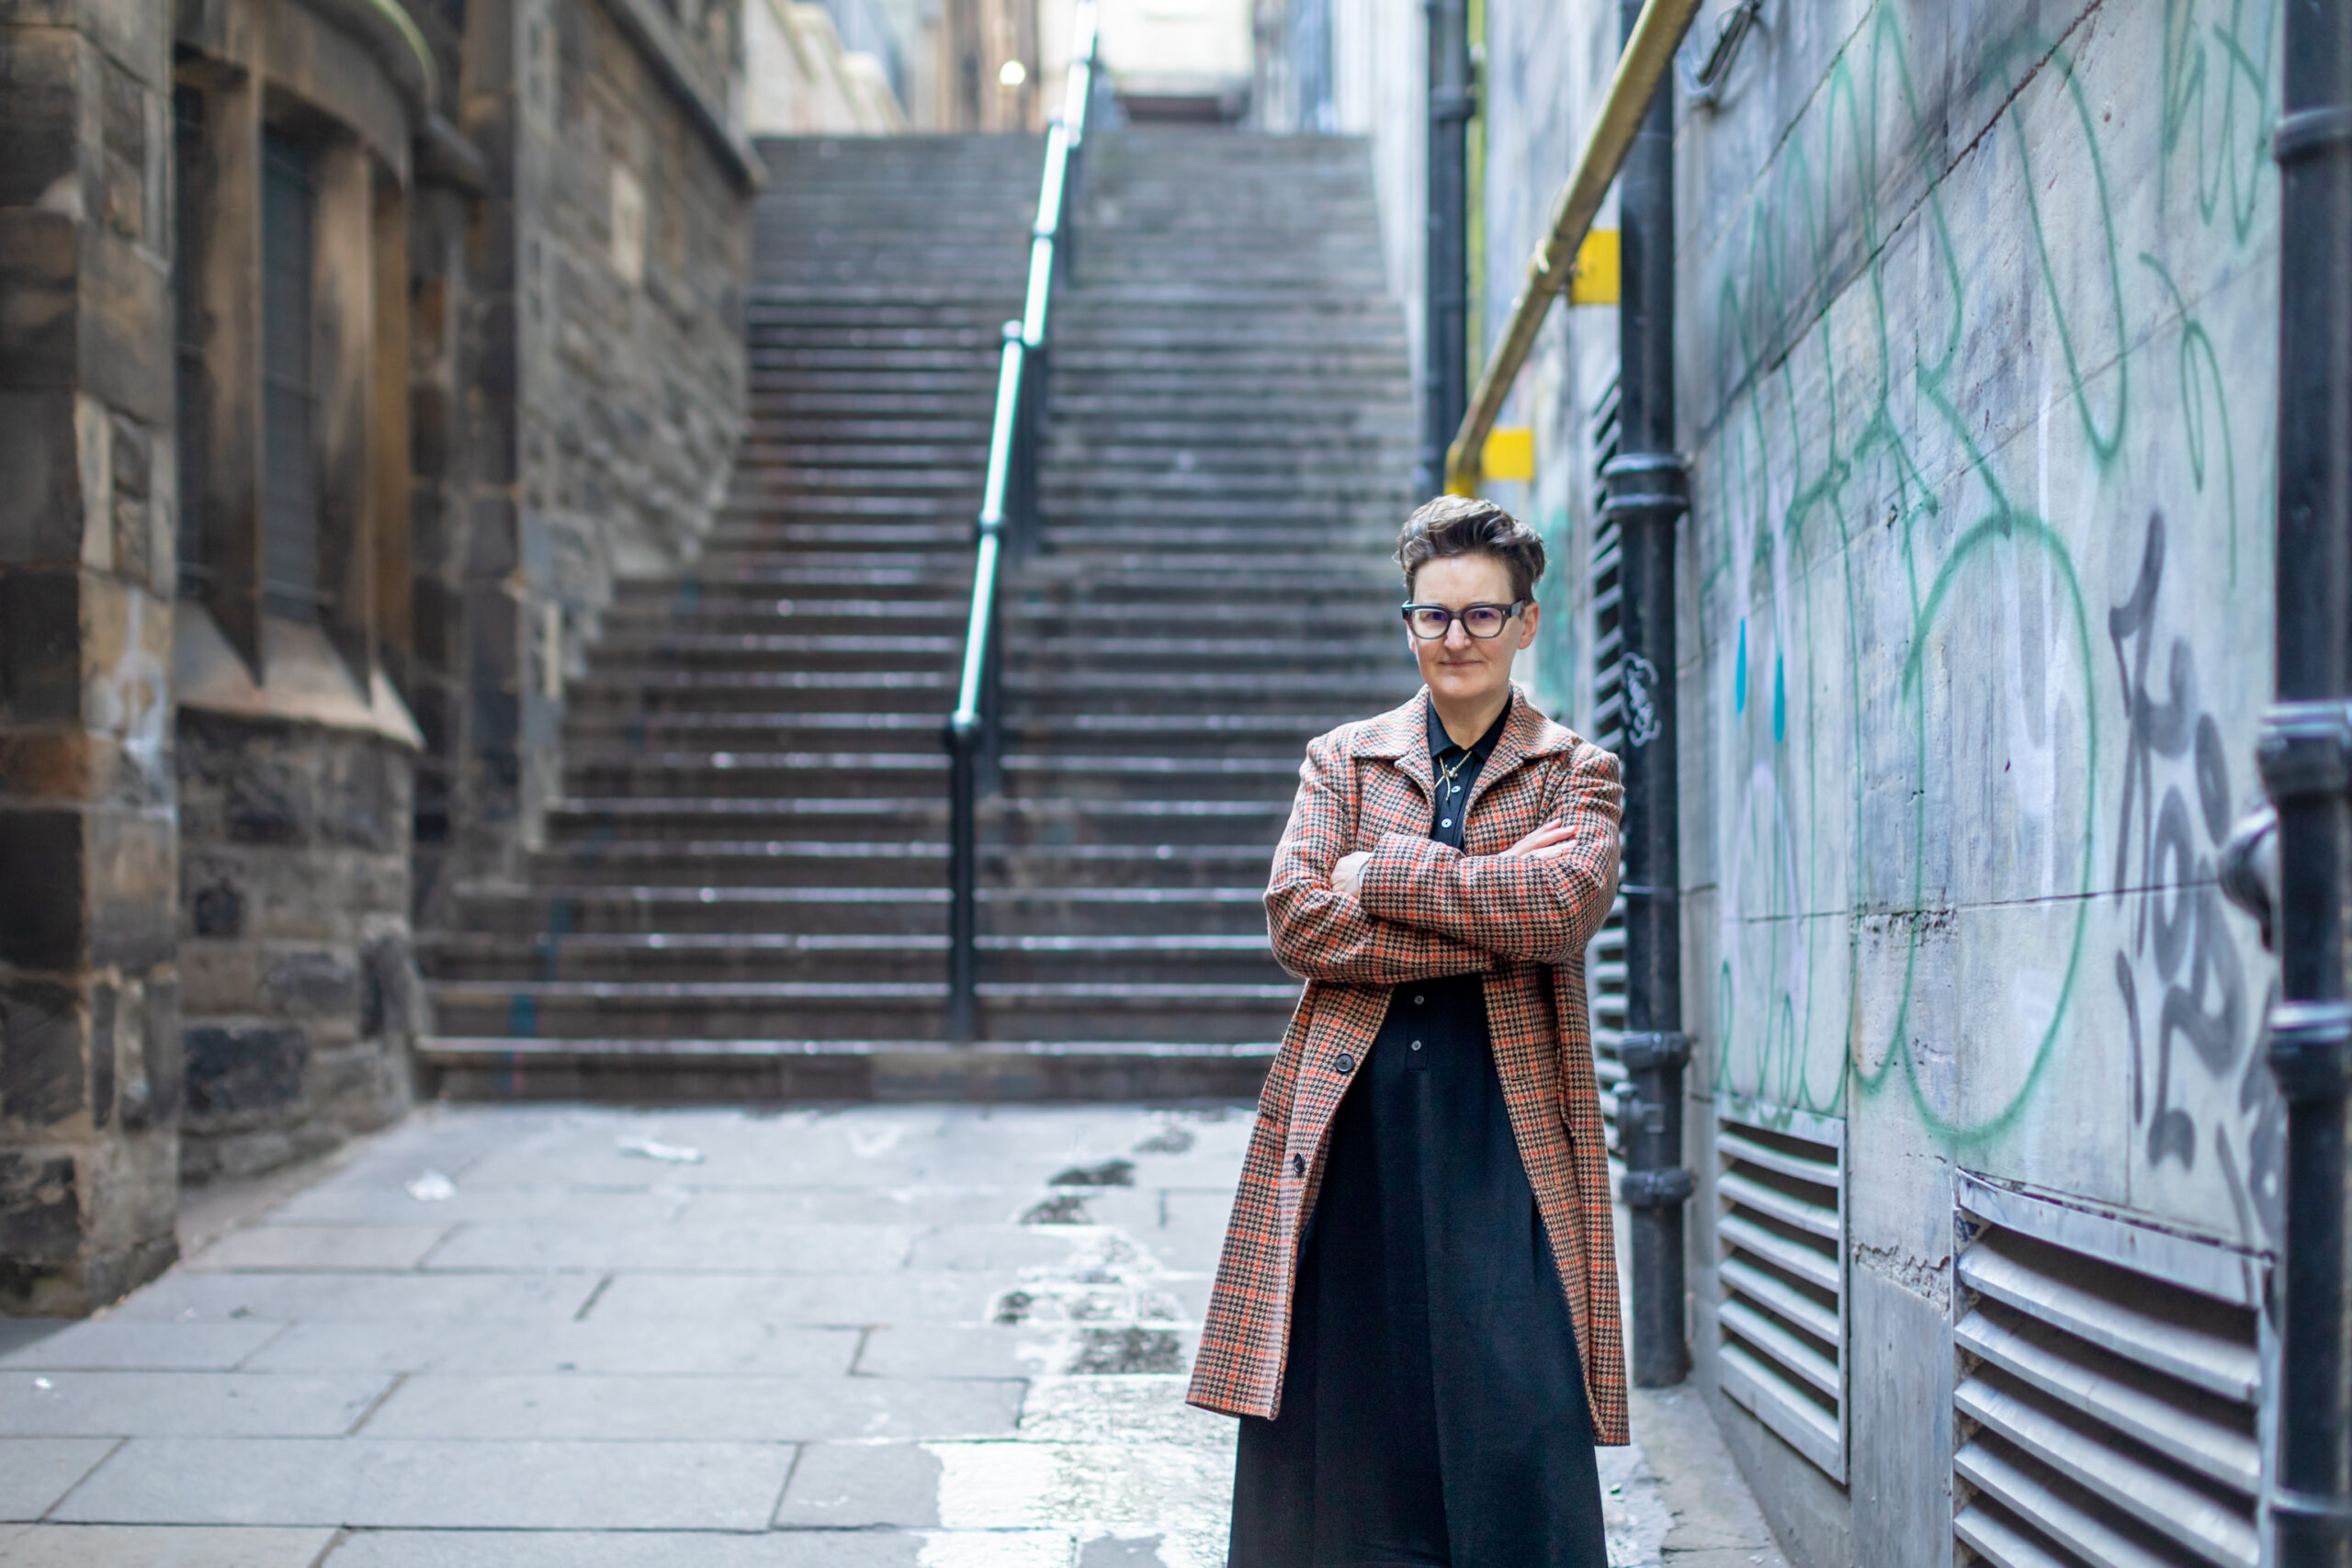 Mary Paulson-Ellis, a white woman with dark hair wearing a black outfit and an orange checked coat stands in a graffitied Edinburgh close with stone steps rising behind her.